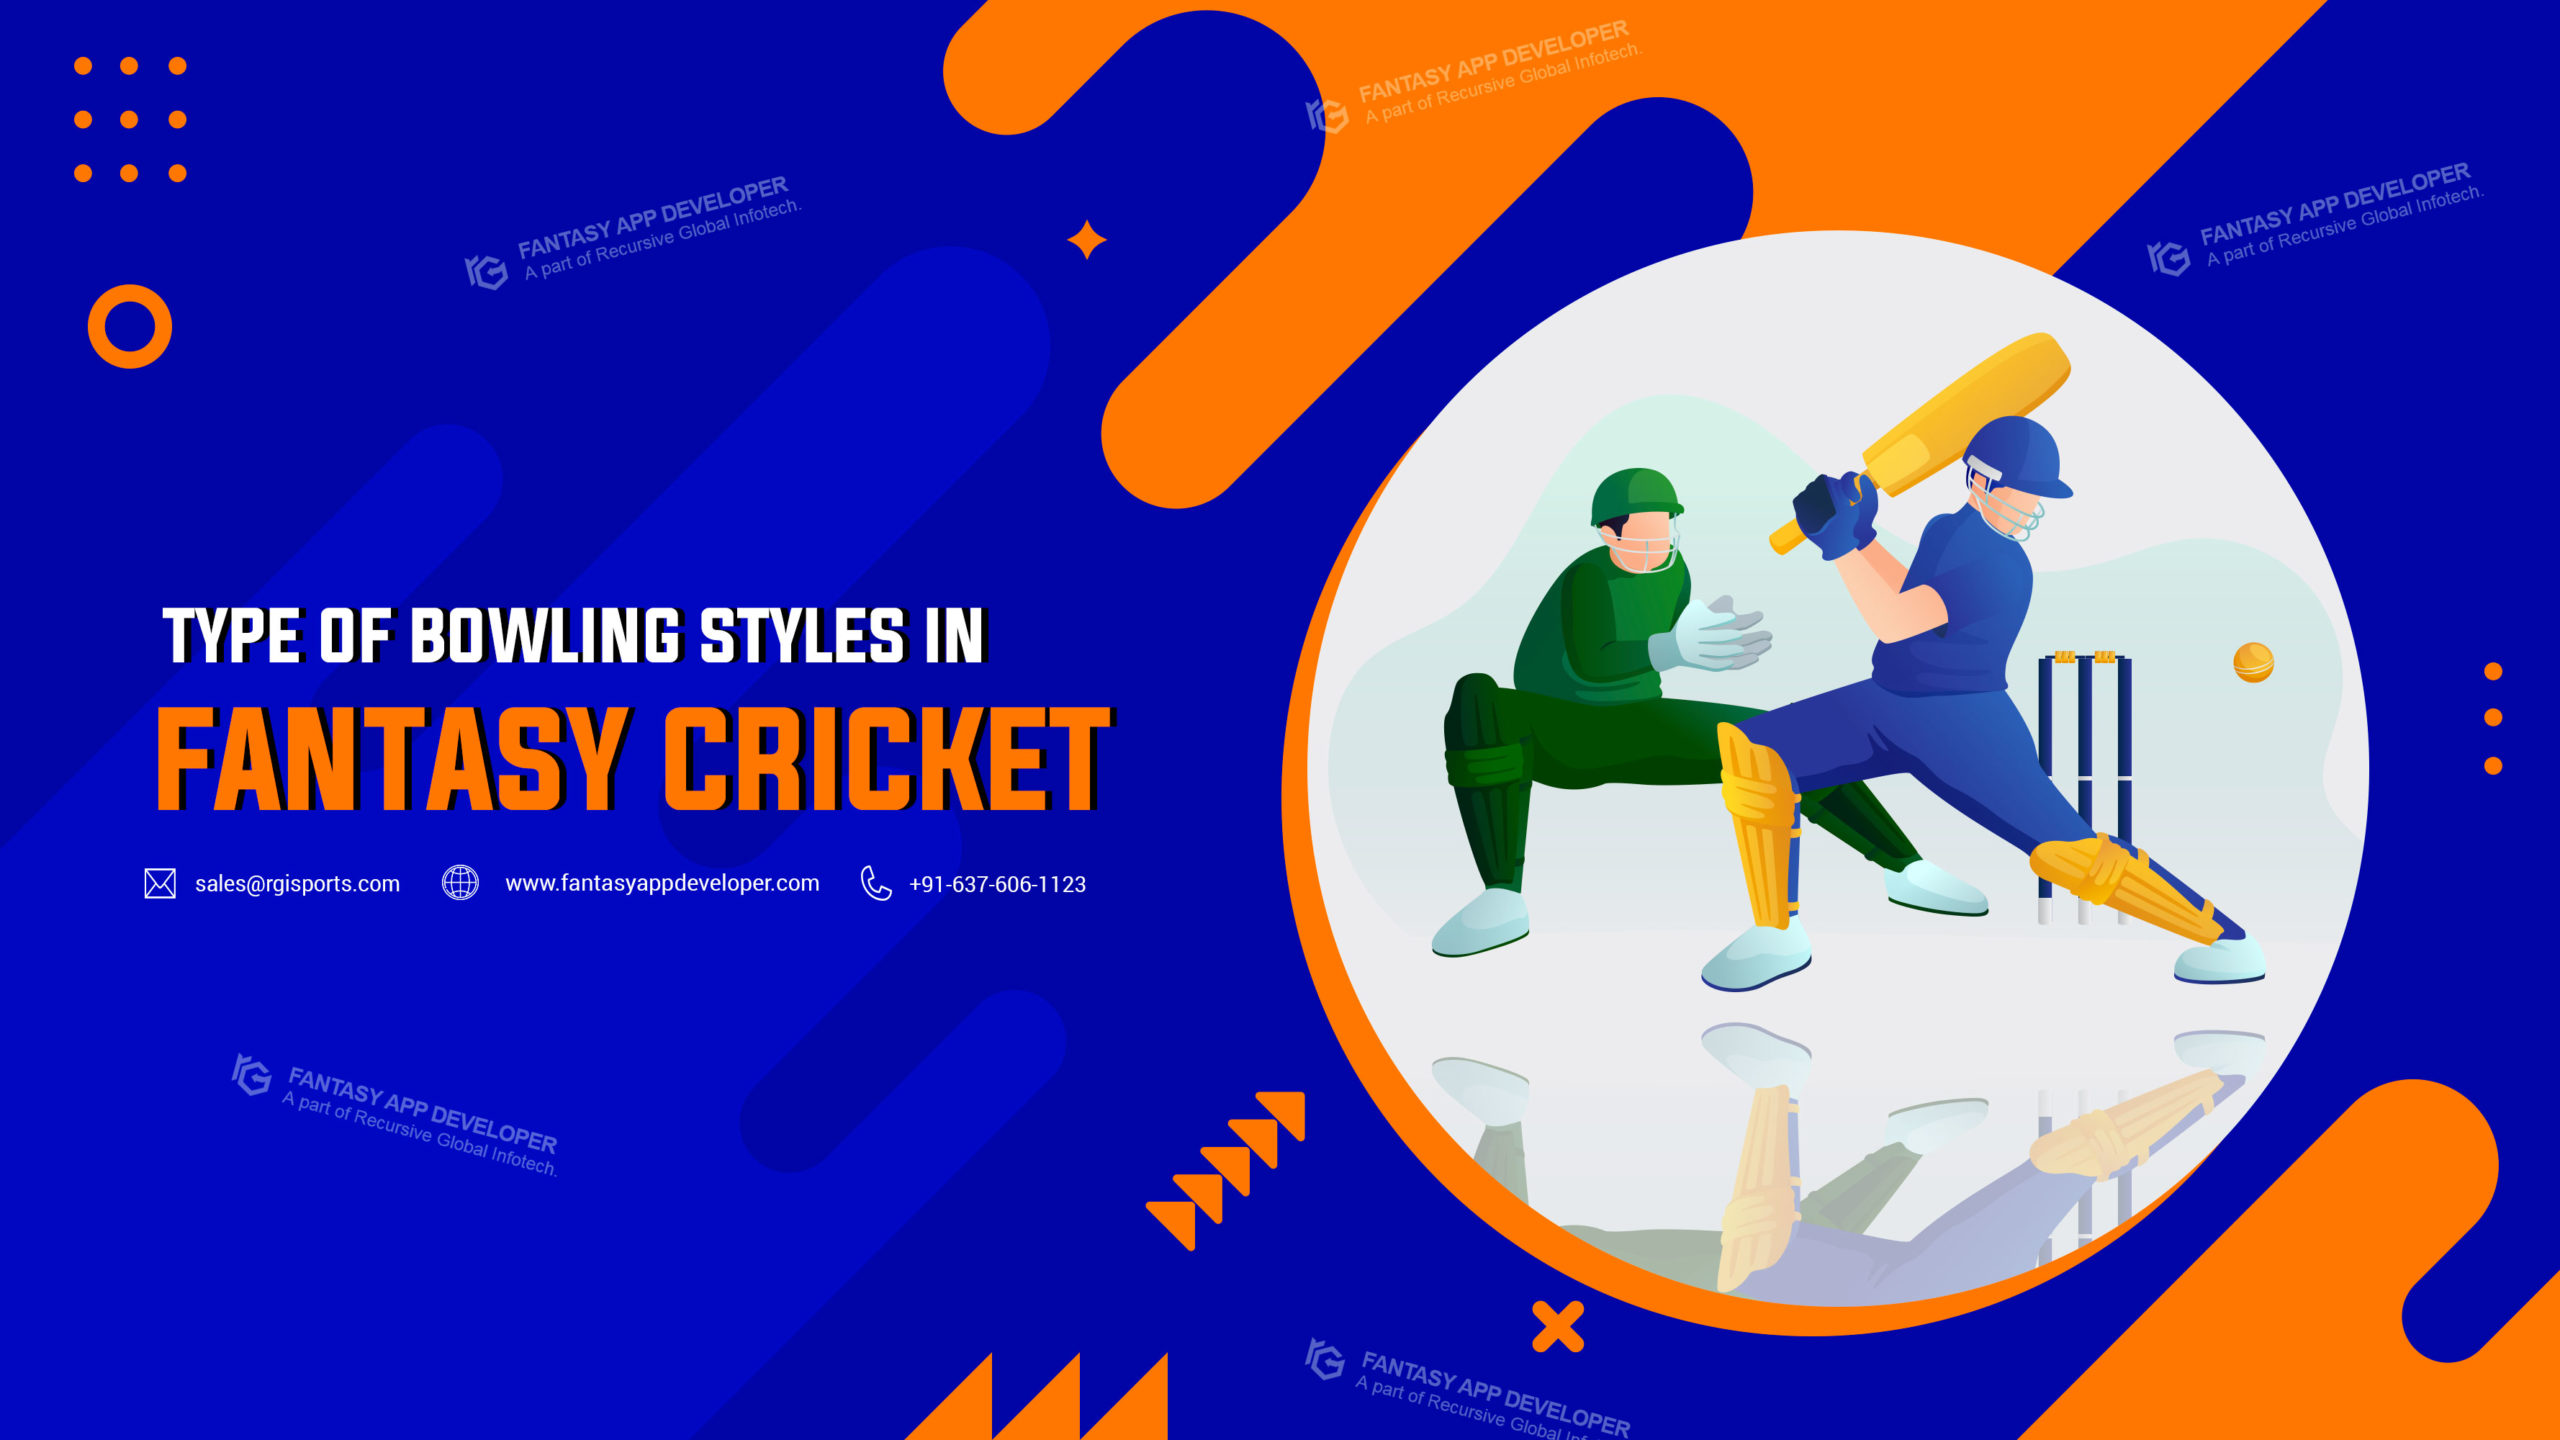 Types of Bowling Styles in Fantasy Cricket